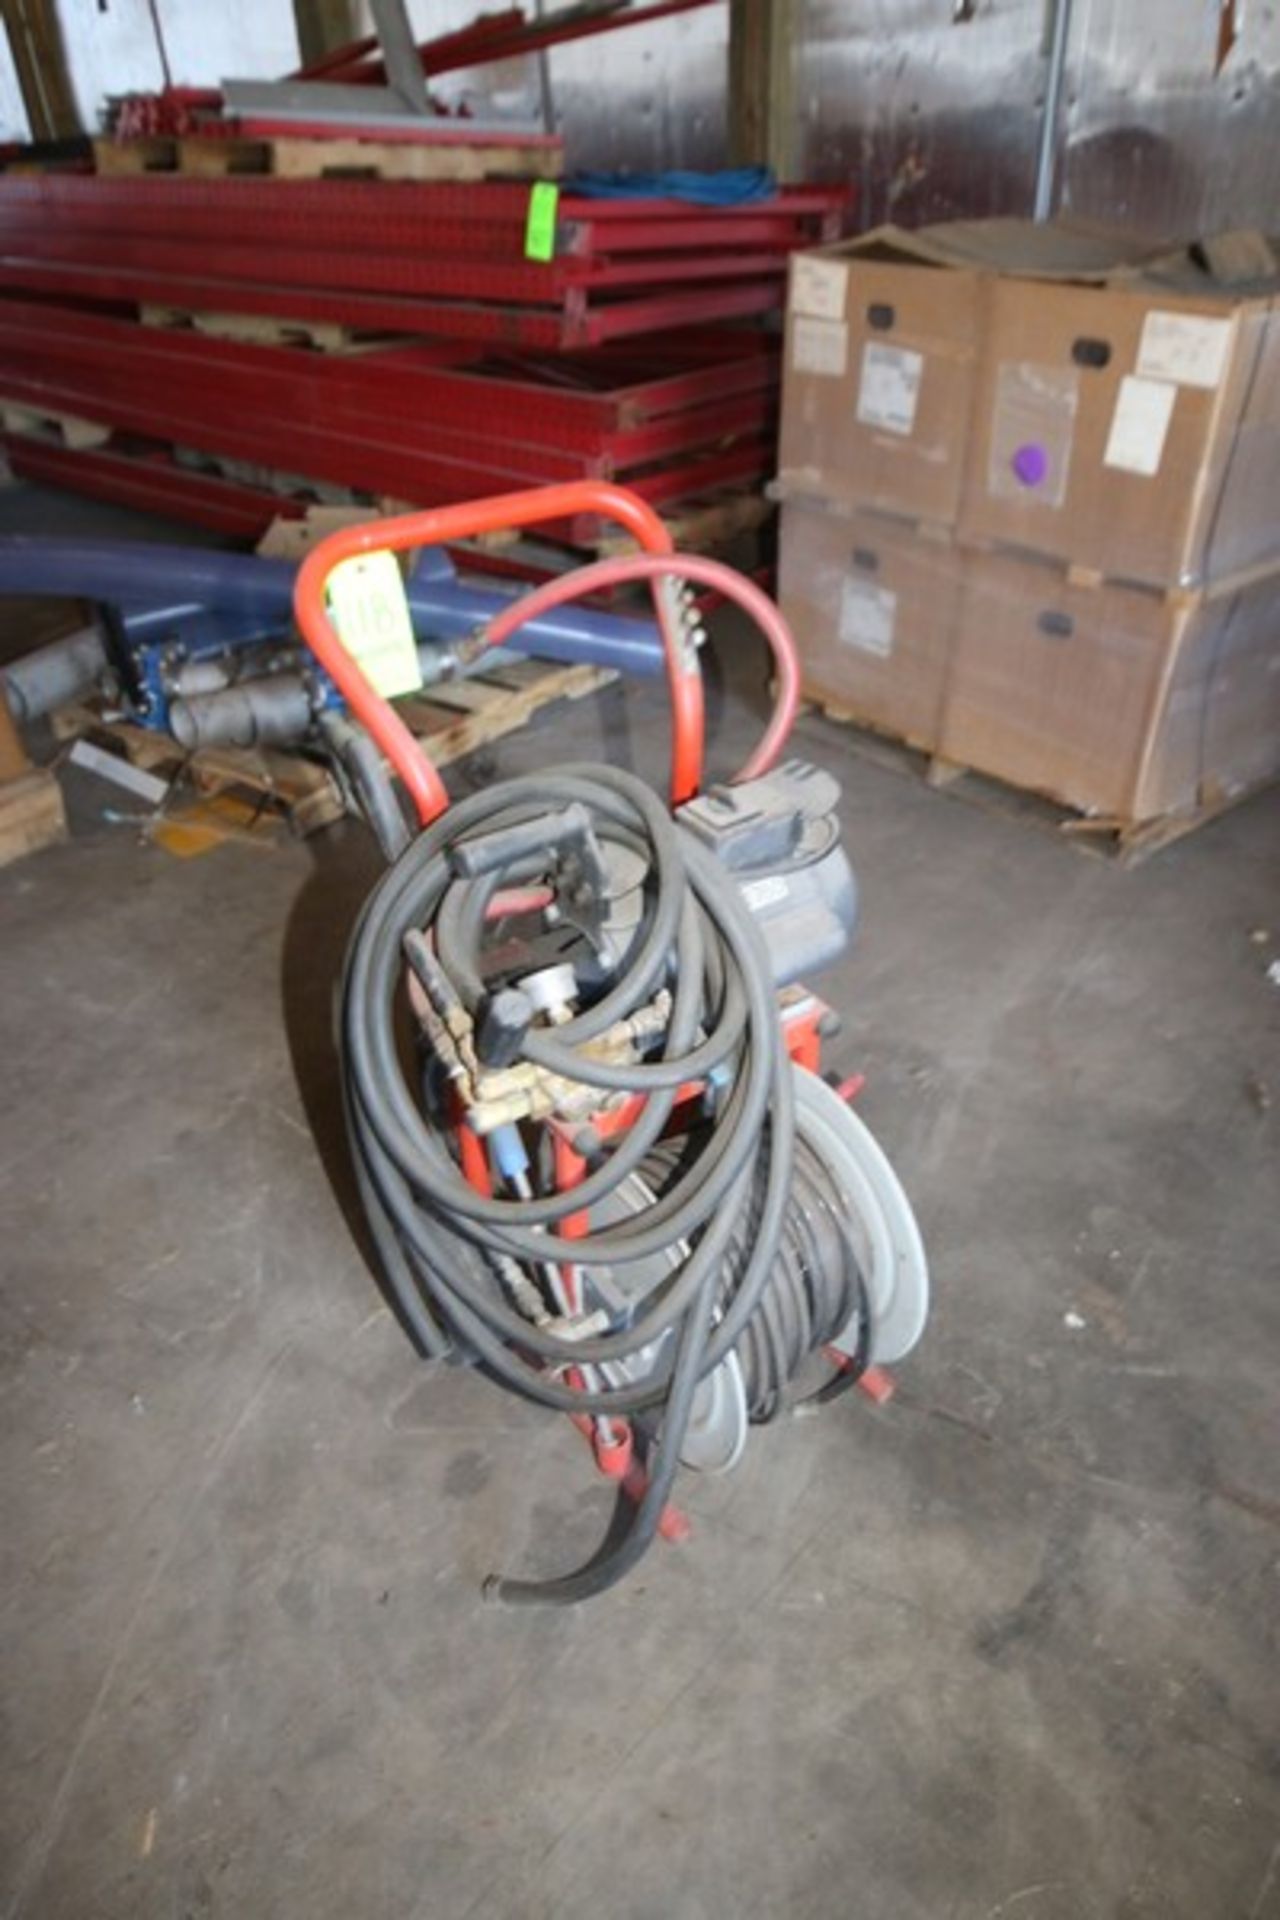 Rigid High Pressure Cart, with Hoses & Motor (LOCATED IN TOY BARN) (LOCATED IN MEDFORD, WI) (